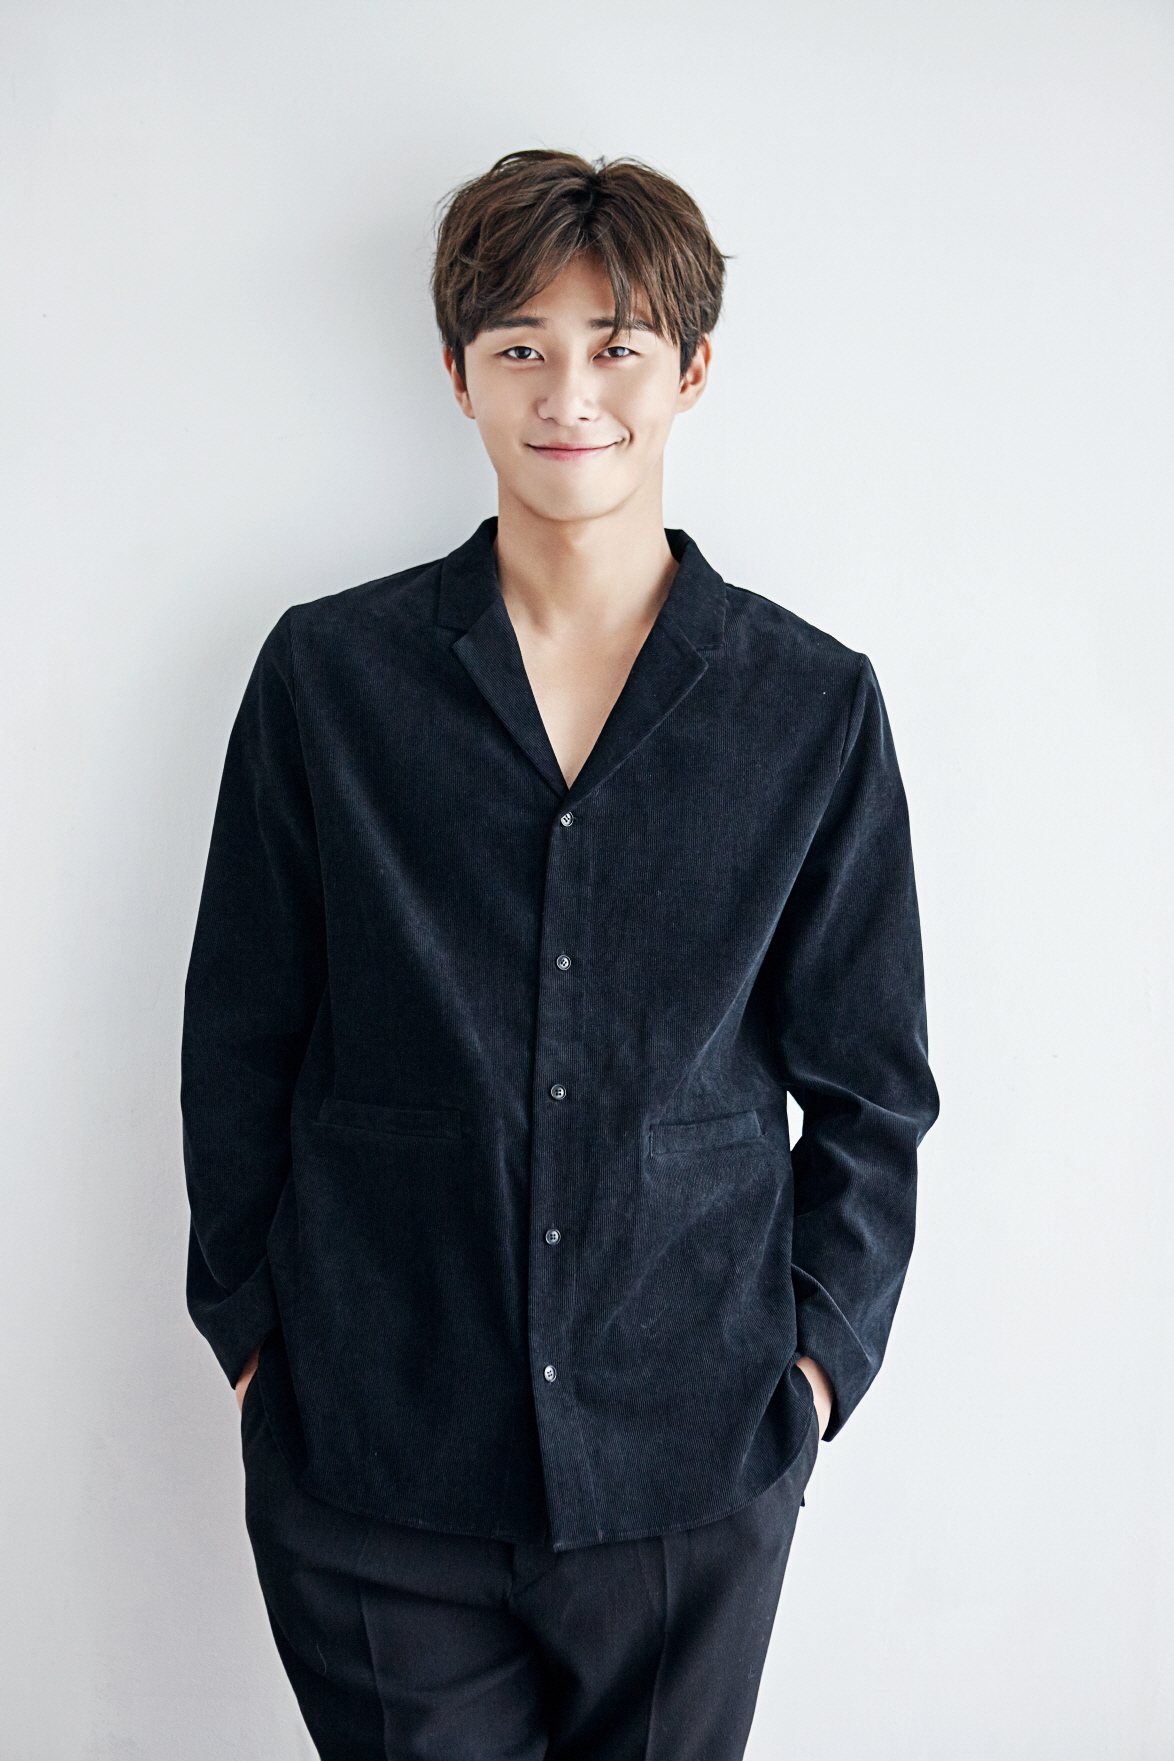 <p>On 11th at 31 in the morning at 11:00 am in Gangnam-gu, Seoul, television of Lee Yeongjun station Park Seo-joon, vice chairman of the tvN water drama Gimbiso is Why (Screenwriter Boxono Borim / Director Bakjeongfa / Gimbiso) An end interview was held.</p><p>Gimbiso is a drama depicting Narcissist - Vice Chairman who was solidly united in self - euphoria that prepared everything until it was full of financial strength, faces, wit, and a secretary who assisted him fully, Mildan Romance. 5. Departing at 8% rating (Nielsen Korea nationwide standard), updating the self-highest rating of 87%, pulling out the terrestrial water drama first place and placing it to the 1st place in the same time zone ratings, such as big popularity collected.</p><p>Park Seo-joon played a role as a famous group Deputy Lee Yeongjun in Gimbiso. Lee Yeongjun always loves himself / herself overwhelmingly in all respects from appearance to ability, overwhelming himself, remaining self-euphoria overflowing, overlooking love affair without being able to do it properly, his secretary Gimmisso (Park Min- young minutes) declare departure will gradually change to turn his heart. Park Seo-joon received such a lot of love that such a Lee Yeongjun comically, sometimes seriously taking advantage of the original persons charm and romance with Park Min-young as well.</p><p>First of all, Park Seo-joon gave Gimbiso to the end of the episode Its been only five or six days to finish, but it seems like the moon has ended when I took a picture with too much crazing. It seems to be a photography work with a lot of fun and spirit.It seems that there are many people who have been interested by many people and seemed to have enjoyed it so much that it seems not to be satisfied that much A lot of viewers have a good time It was a busy time that was a tight shooting period, and among them the work of this time also did its best, so there is no regret.The works of this time also have a lot to memorize It seems to remain. </p><p>Park Seo-joon revealed that it seems to have to have a cautious alarm popular character of life popular. He says, I do not know what kind of work I will be doing in the future, I do not think that my heart is so, at the moment the life food is determined for the actor, it will become a sure color even in actors life It seems that the state of the blank paper seems to be the best as an actor, while adding that the word of life characters is easy to hear, but it is also words as long as it has to have caution. Also, regarding the word heir, I am thankful for praise and I hear that people of any occupation will come at the heyday, and the heyday is when it is in full bloom when ripe, I think that it is the beginning. </p><p>Not only acting breathing with Park Min-young, but also Romance rumor received much attention, which also frankly told us. Park Min - young and Romance rumor on the 27th have expanded to Park Seo - joon ahead. At that time the affiliated offices of both sides related to Romance rumor coverage, revealing the official position that it is not a fact and is only between friends. In this interview, Park Seo-joon said, I thought that the preliminary Romance rumor talk will continue until this week, but I am confident that I can afford it, and My wind is more drama lighted I wish it was an interview, it was a work I made very hard with each other, so I regret that it will be the next lighting after the drama ended. </p><p>Park Seo-joon also explained to the rumor that it was subsequently involved in Park Min-young to be cast to Gimbiso. He said There was also a story that Park Seo-joon I heard also talked about Park Min-young (I heard the story that Romance rumor was from before.) I think that it is a story not to be talked about. There is no cost to make it by the production company and the cost is cast for the casting and there is a director and I do not have any influence to that extent.I not take time to cast it but it takes a long time to finalize the casting, I do not think it is a story to say whom I would like to do.I think that it is an inflatable hoax.I think that the resultant work improved and I could think that such words could come out.As a result smile and Yong Joon I think that I do not think badly thinking that such words can come out, so I think Micho Turna like this as well. </p><p>I also talked about the possibility of actual lover development with Park Min-young. Park Seo-joon says, Since it is a role to love while working while not knowing what kind of possibilities it is possible to think about the benefits of this person, thinking that the person looks beautiful I think that there is only a positive feeling in this process, he added, I can not affirm the possibility, I do not know the work of a person, so I think if there is a problem if I have to see it for a long time, I added. About the Park Min-young as an actor, I thought of acting as an actor who wants to try the work at one time. There are not many actors who can be together in my age band know when acting as an actor I was one of the actors I wanted to do in that, it was very nice not to meet like this time, he said.</p><p>Kiss scene with Park Min-young, bed scene etc. Also mentioned in the scene that became a topic in Gimbiso. He says, The bed scene is very difficult and difficult in the position of the acting person, sometimes makes more will to the director.When it is only seen in the script, this situation is not drawn, so the composition of the camera, breathing etc. I tried to make it as natural as possible reflecting on-site nature, I said, I think that it was great not to have a scene in the bed scene but such a feeling comes because of the atmosphere. It seems that it became a problem for me, so I bought a lot of atmosphere.  About the tansque kiss scene that became a hot topic, The kiss of the tance was also special in the space, it was a scene where it would become like to check the hearts of the two people who have kept up with it.The atmosphere that gives a strange feeling given by the space called tance There was a case that it was sometimes. </p><p>What is the secret that I got a good reputation with Park Min-young and romance? Park Seo-joon cited the common opinion and confidence in the opponent. He said, Of course, at the beginning, since we perform the first performance, we have no choice but to be awkward, because we have the same goal consciousness that we want to improve this work so much, not only the director, director, I tried to trust the opinion of the unconditional opponent.I think that no one can understand skillful Lee Yeongjun so it seems that the person who plays the smile can understand the smile most I think that I can not comprehend 100% of the emotional line that the person understands, there are many things in common with each other, among them the director has adjusted and did not have the perfect breathing I added.</p>